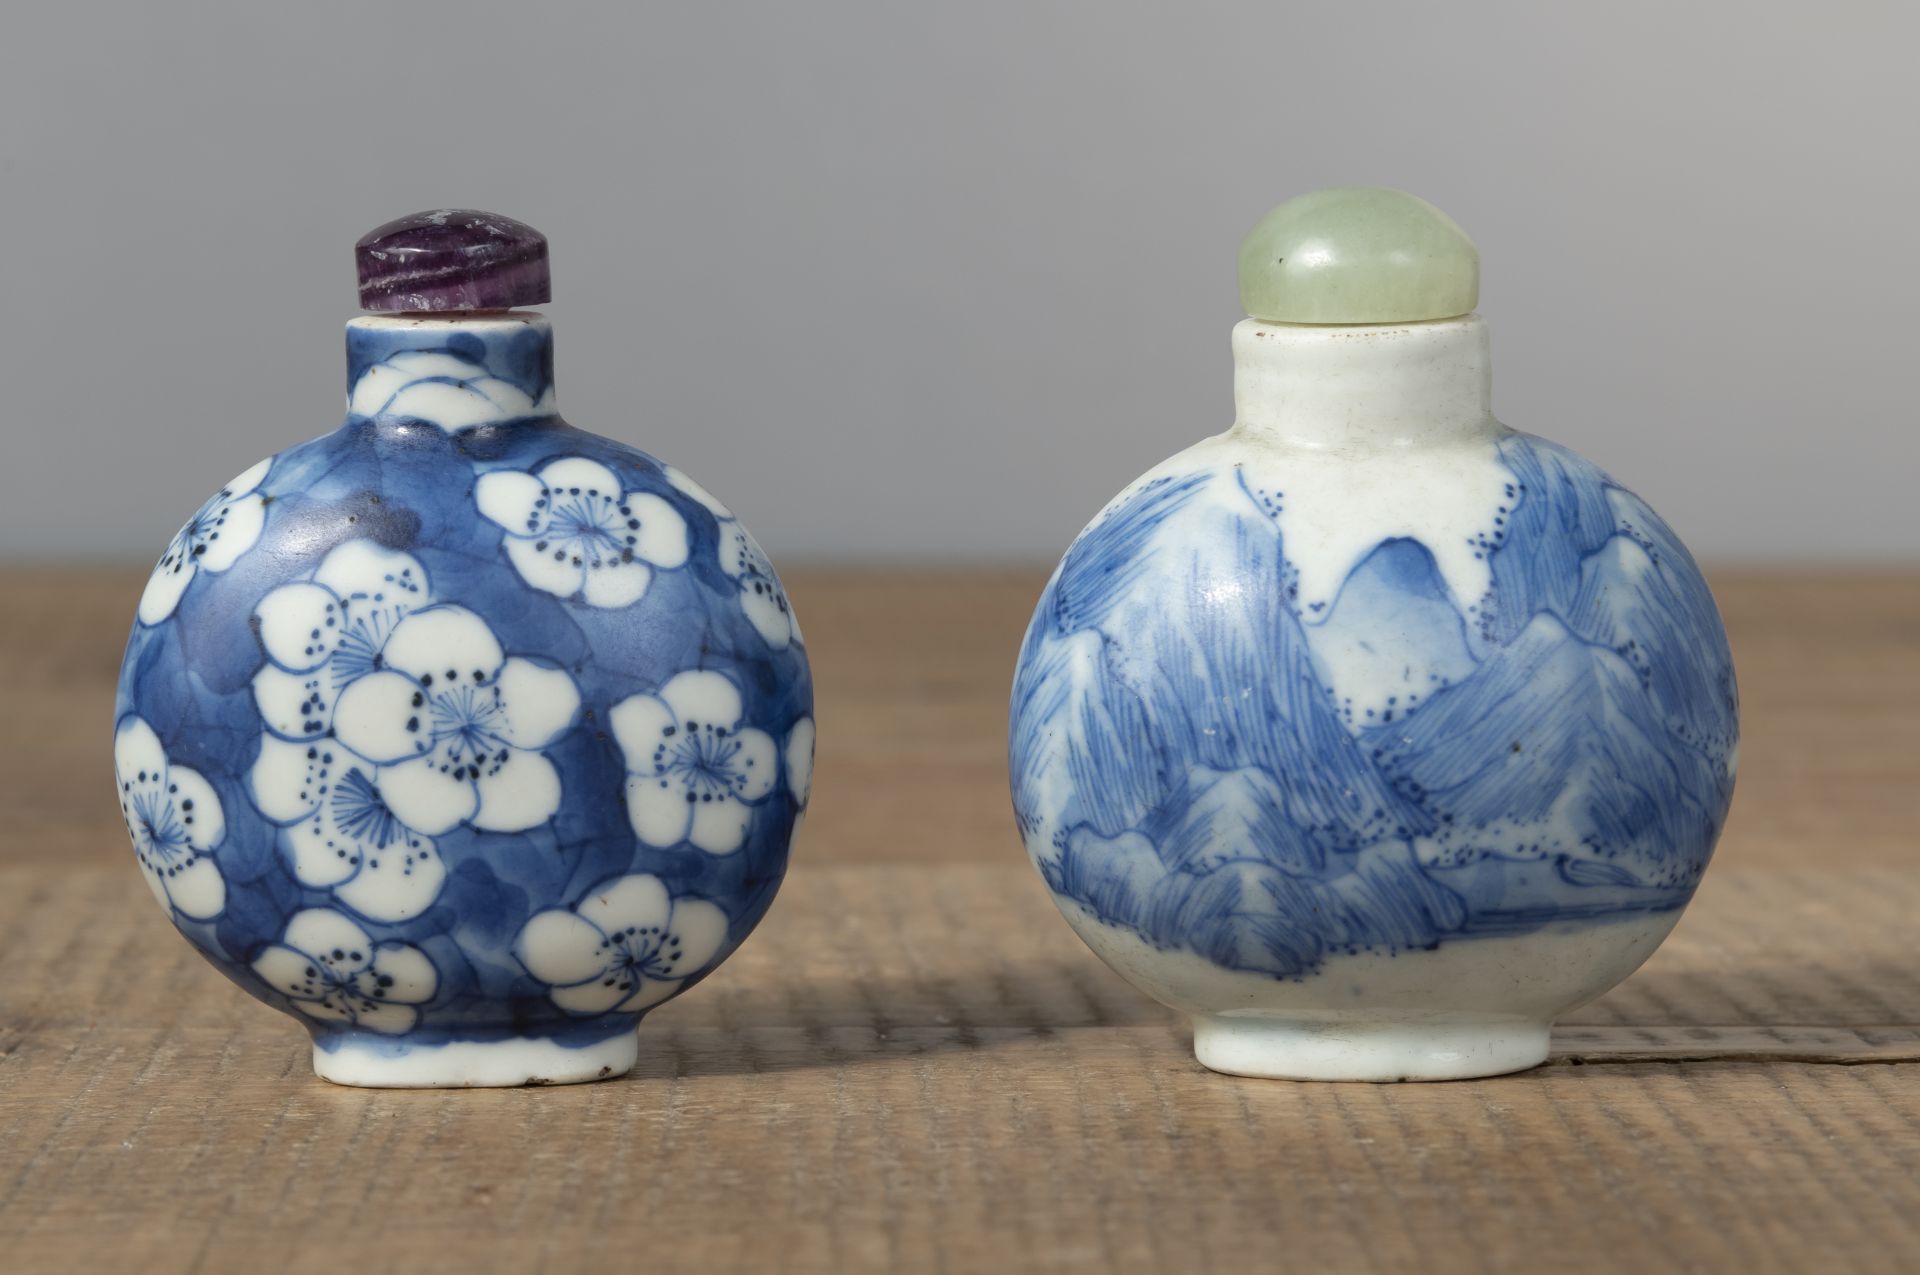 TWO BLUE AND WHITE PORCELAIN SNUFF BOTTLES DEPICTING PLUM BLOSSOMS AND A MOUNTAIN LANDSCAPE - Image 2 of 4